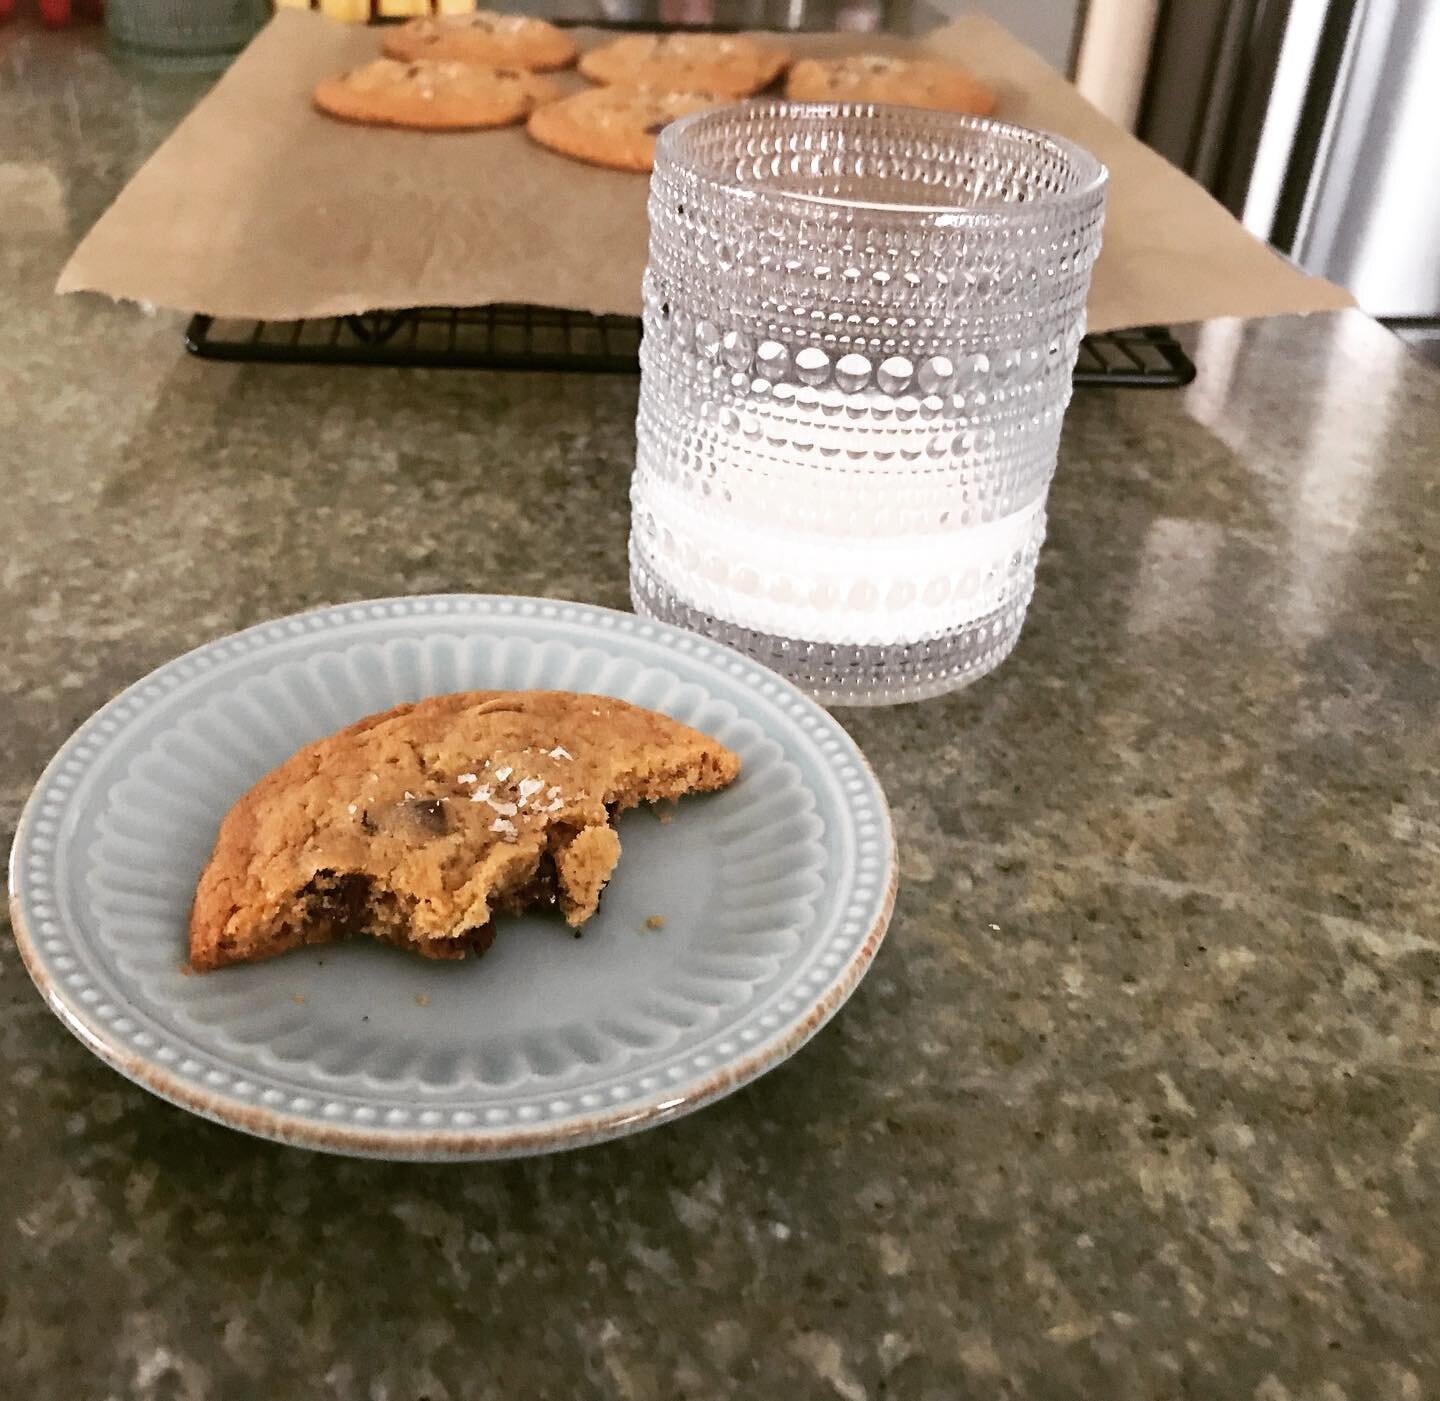 Ever since I gave my old job the heave-ho, I&rsquo;ve been talking about making @thelazygenius&rsquo;s &ldquo;absolute favorite&rdquo; chocolate chip cookies. But the dough in that recipe takes a three-day snooze in the fridge and even a gal on sabba